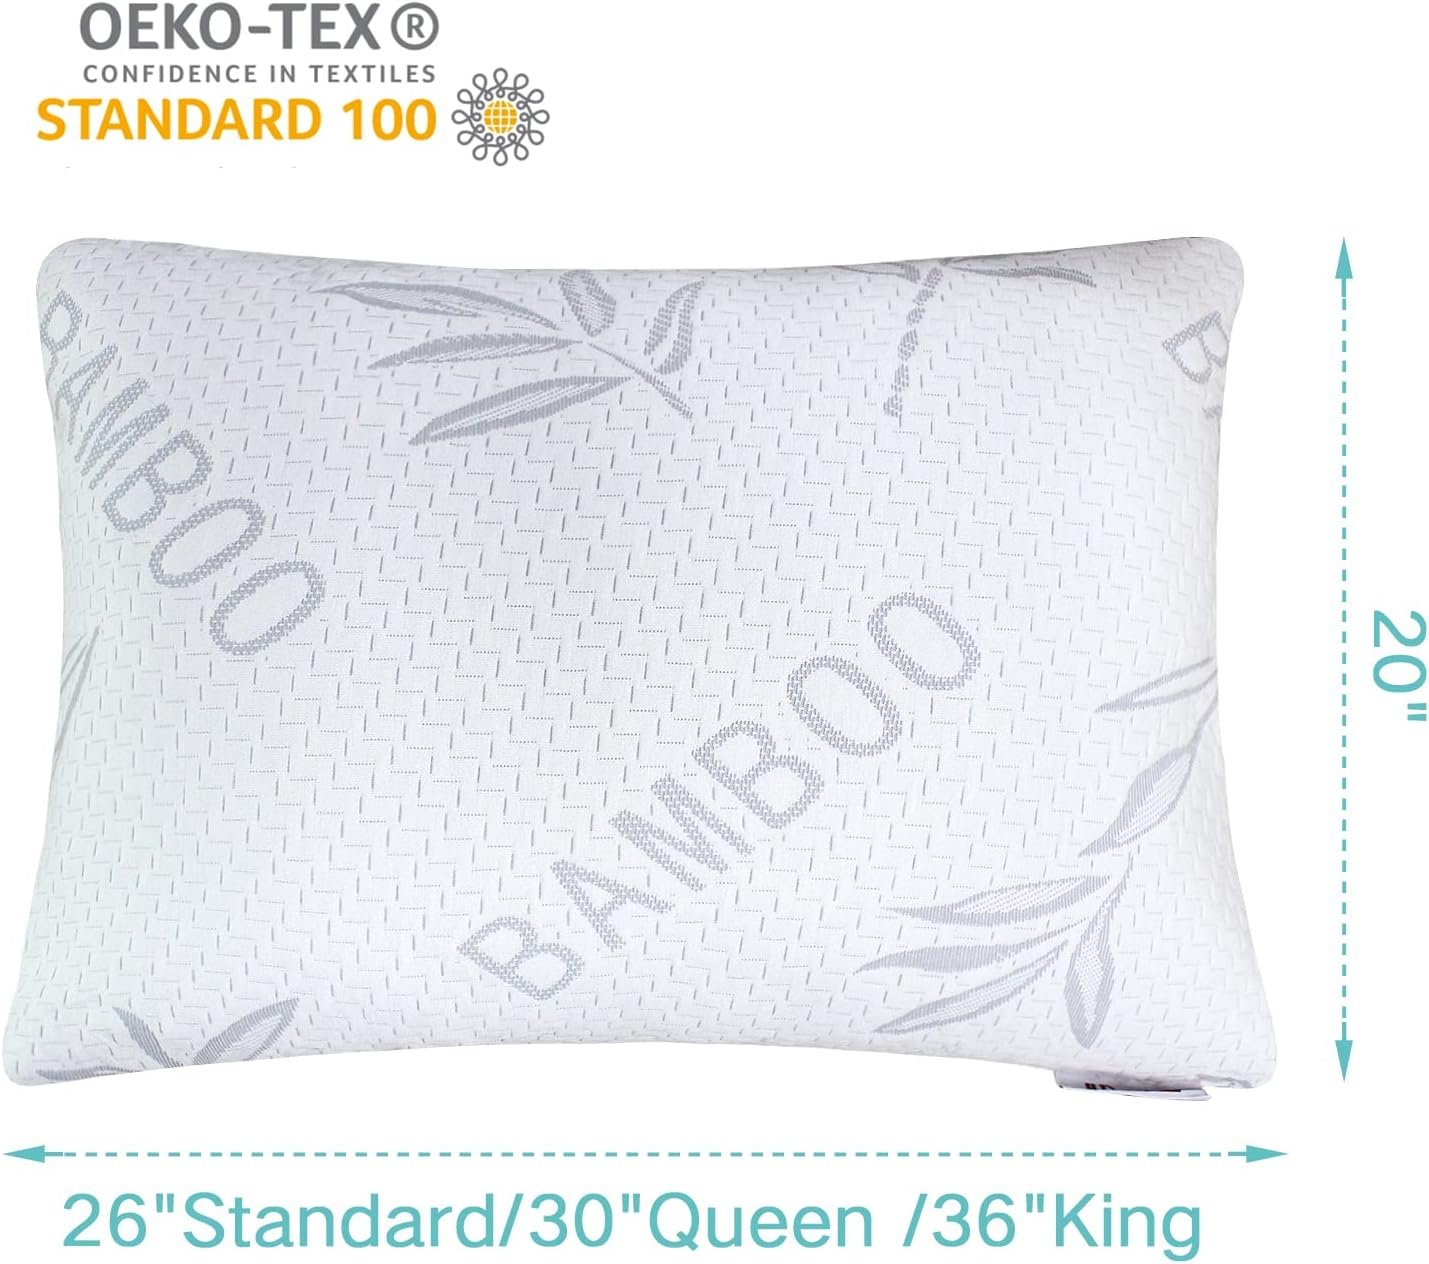 Bamboo Standard Size Pillows Set of 2 - Machine Washable Bed Pillows for Sleeping for Back, Stomach and Side Sleeper - Firm Luxury Extra Comfy Cooling Shredded Memory Foam Pillows 20*26 in